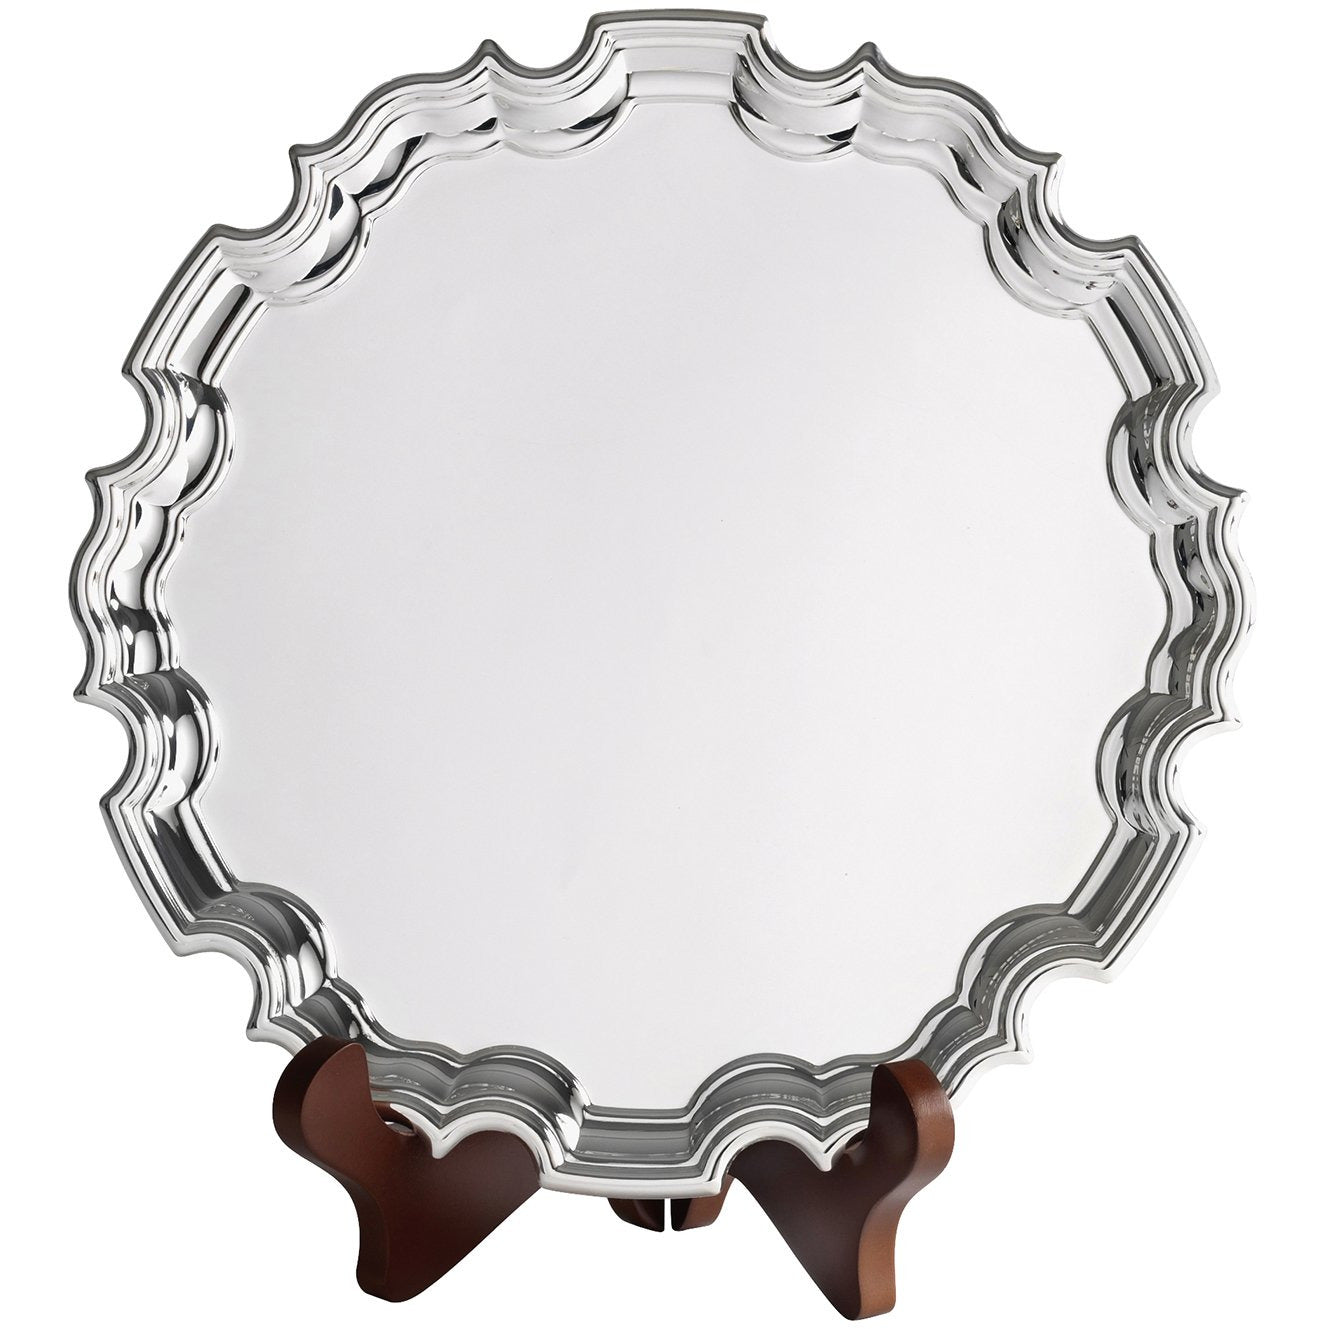 Silver Plated Chippendale Salver with Satin Lined Presentation Case and Wooden Stand